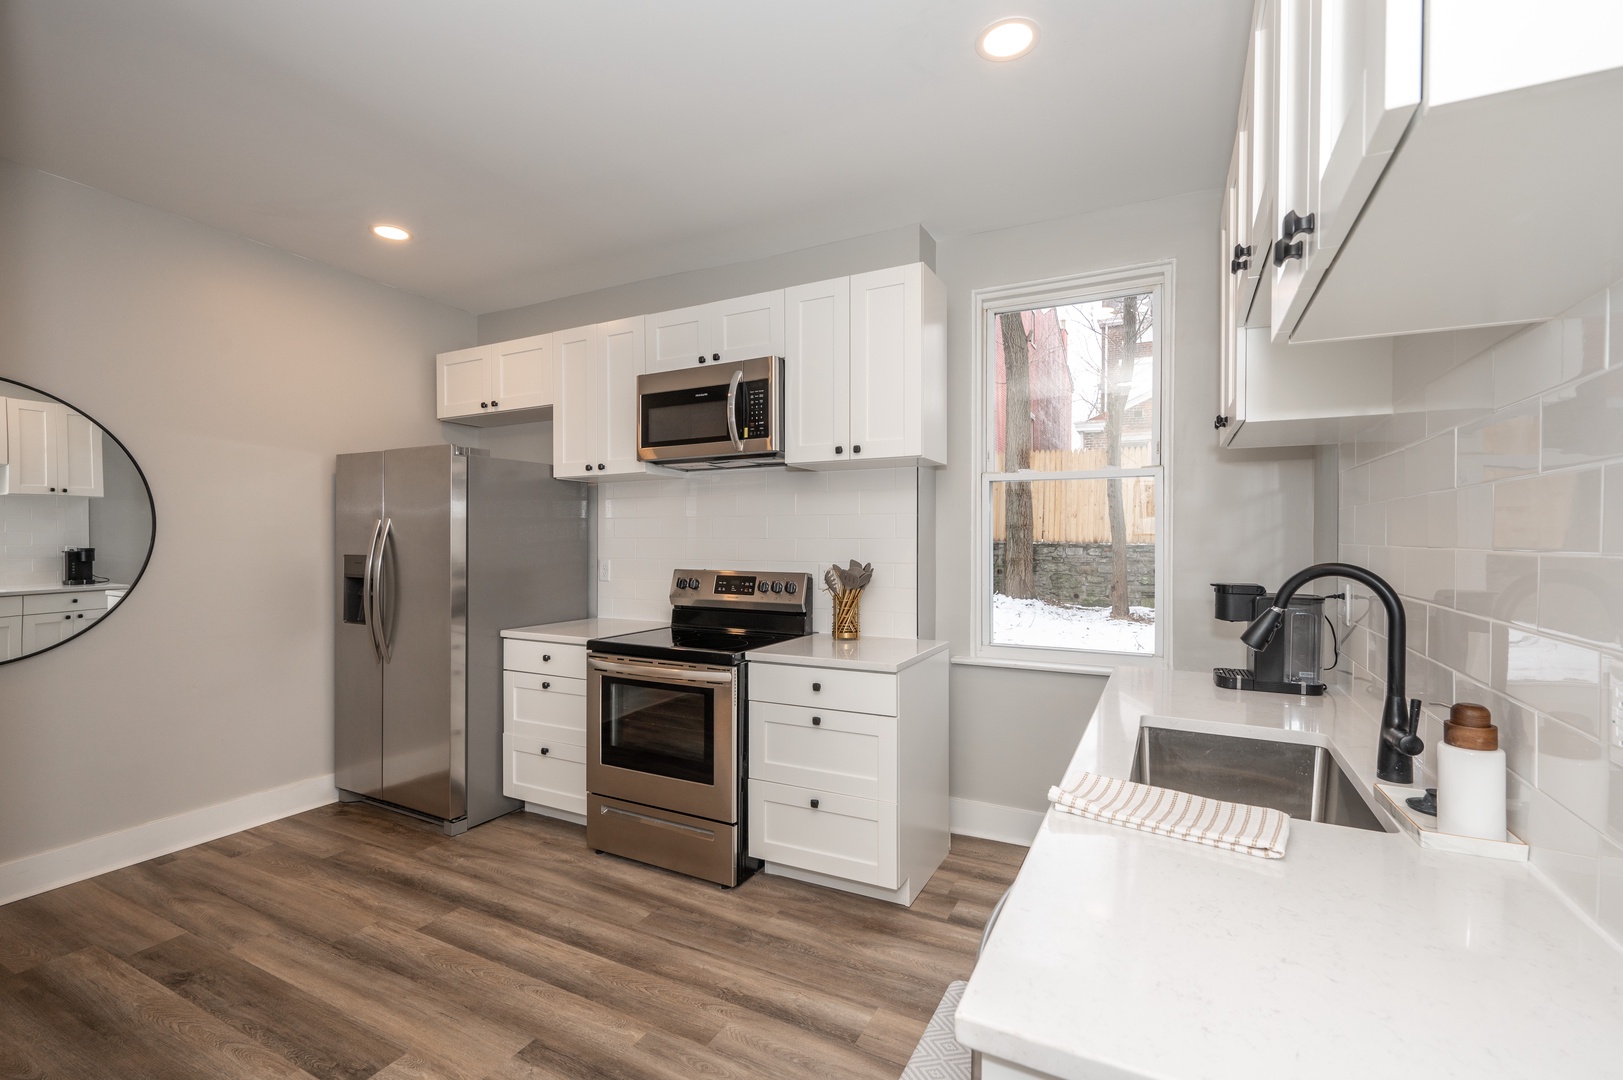 Apt 1 – The kitchen is spacious & well equipped for your visit to Covington